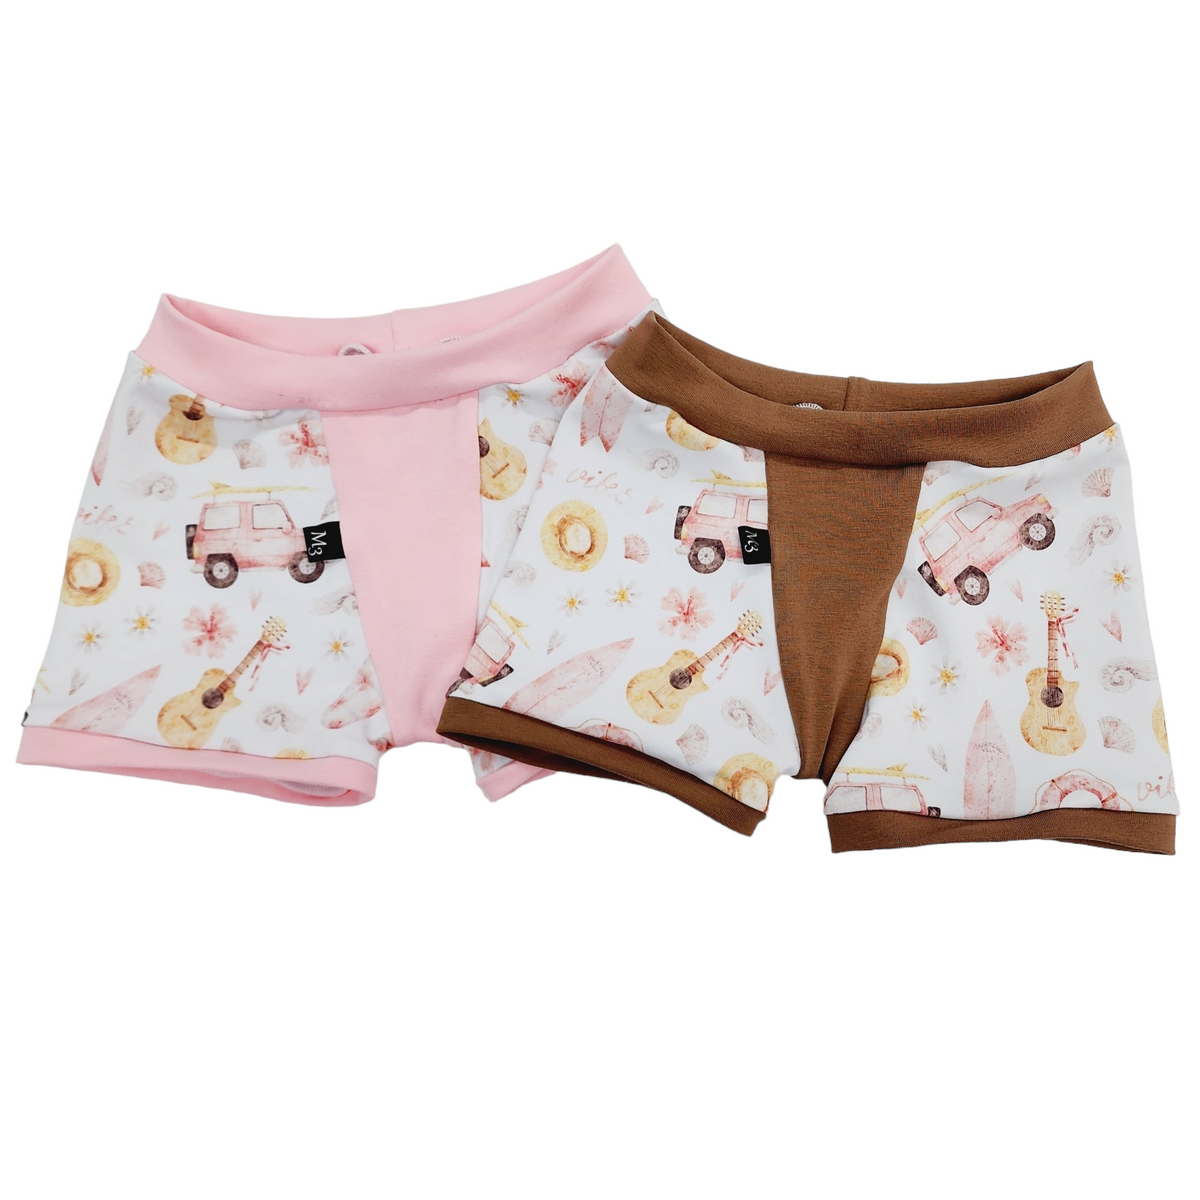 M3 Creations | Children's boxers | Summer Vibes (ready-to-go)